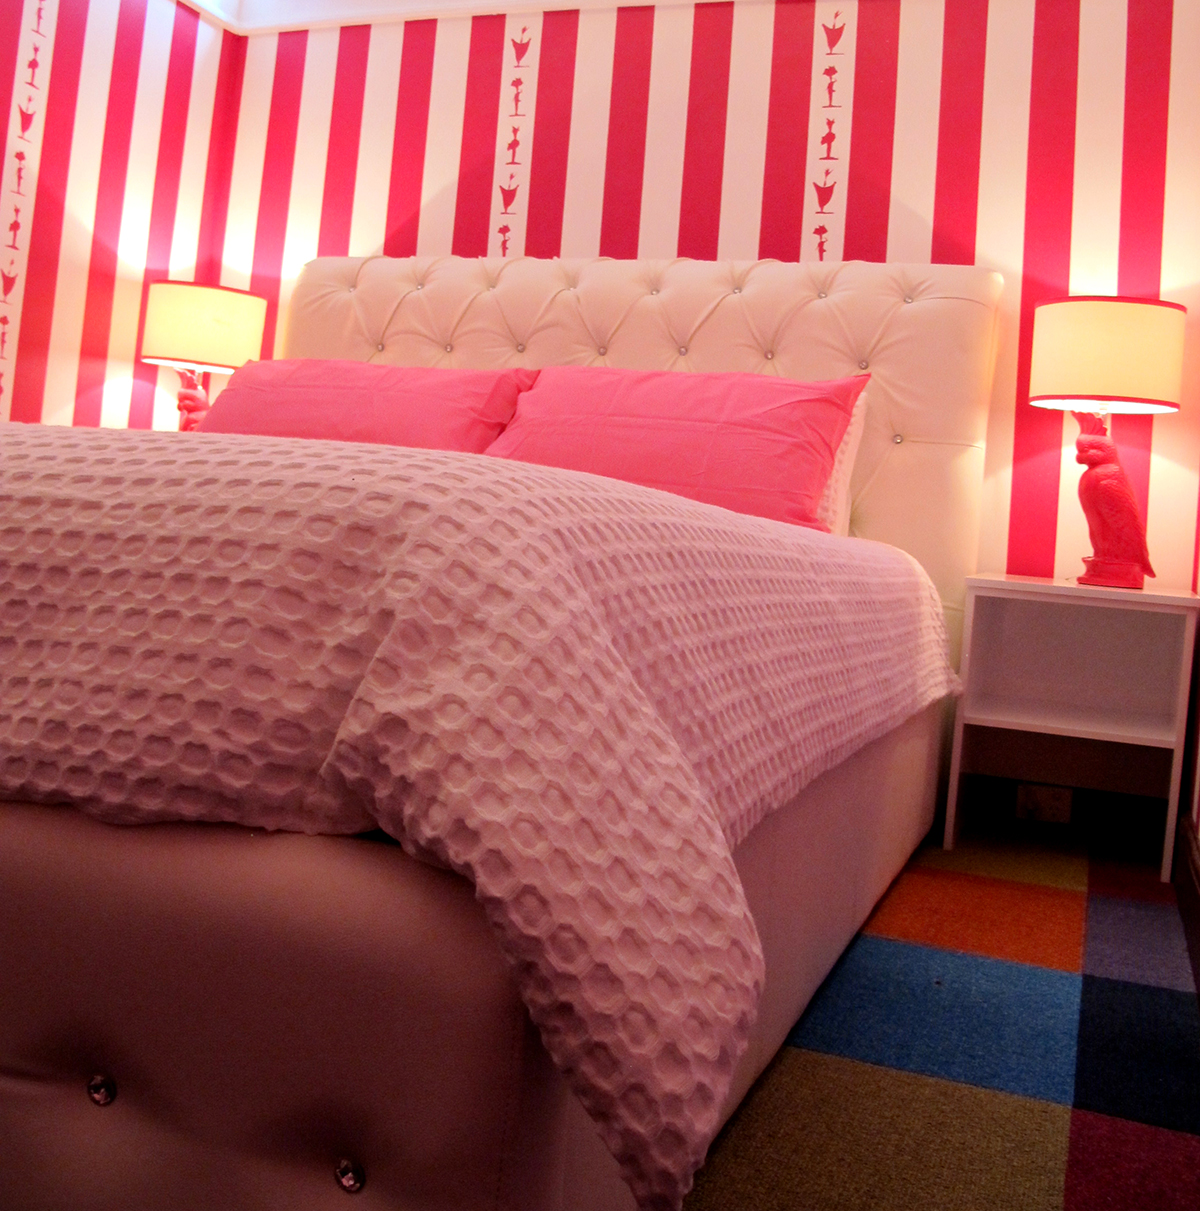 palace-hotel-priscilla-suite-pinkbed_2.jpg